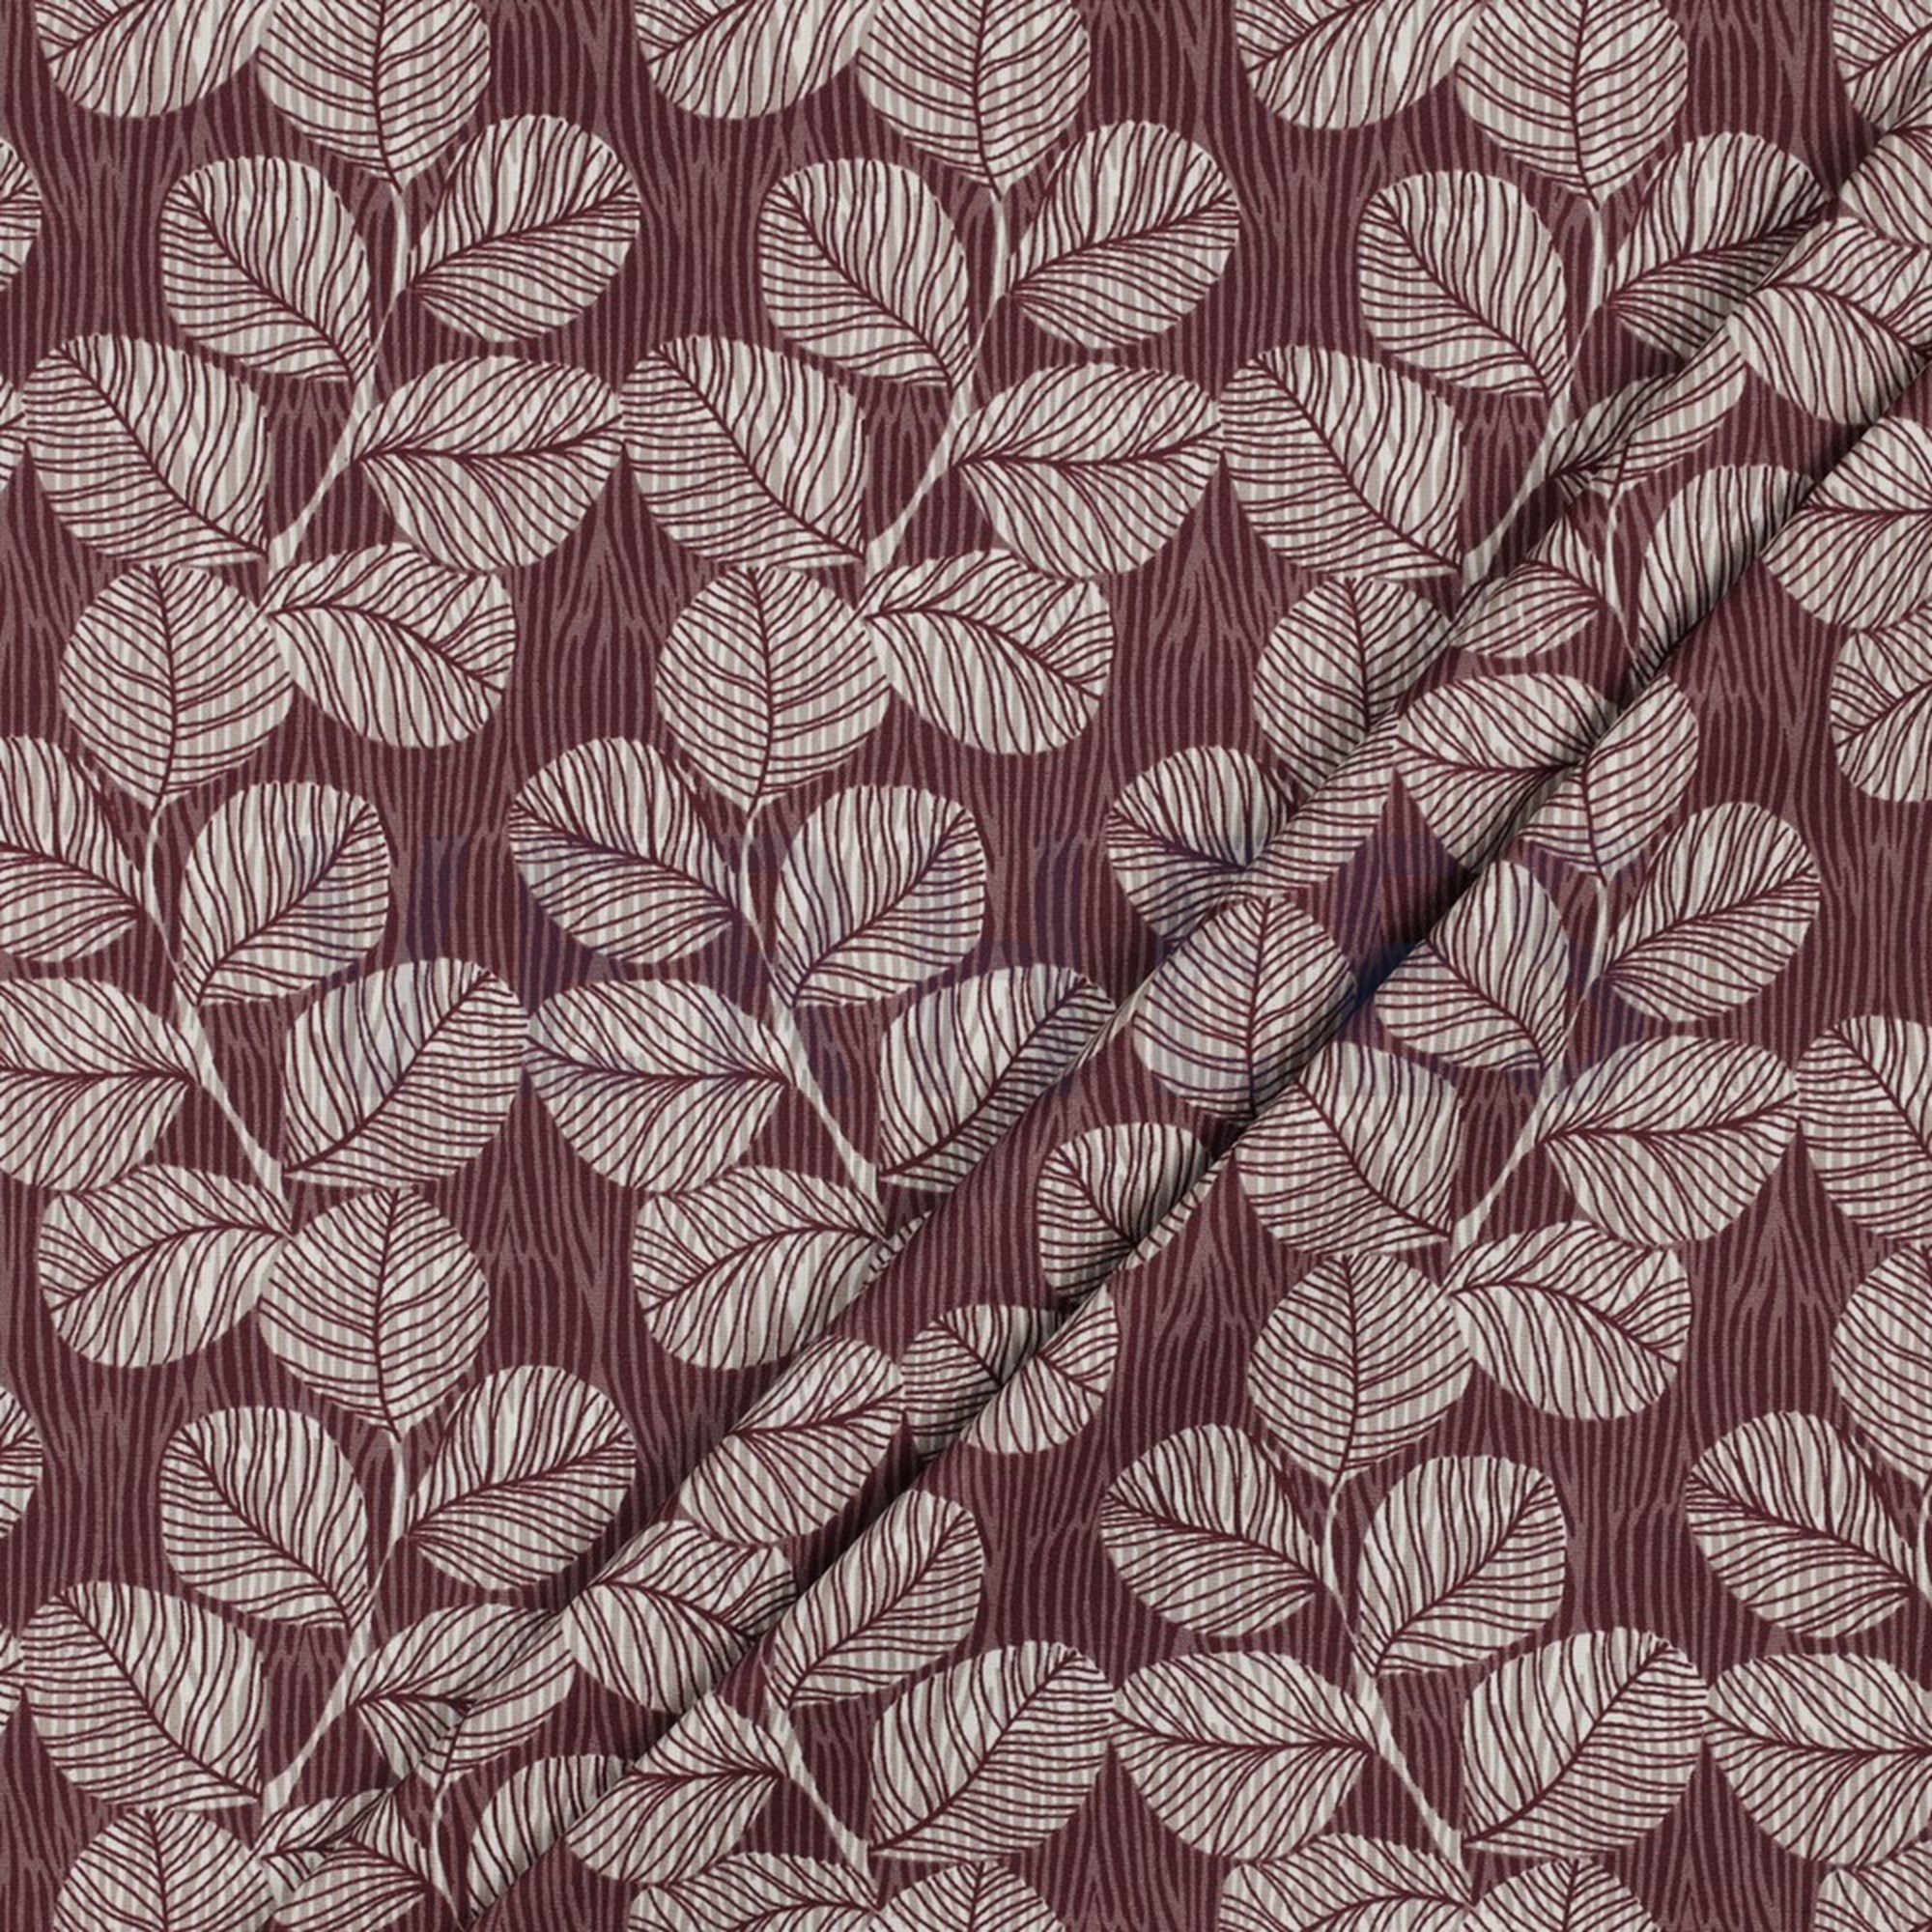 COATED COTTON LEAVES MULBERRY (high resolution) #2